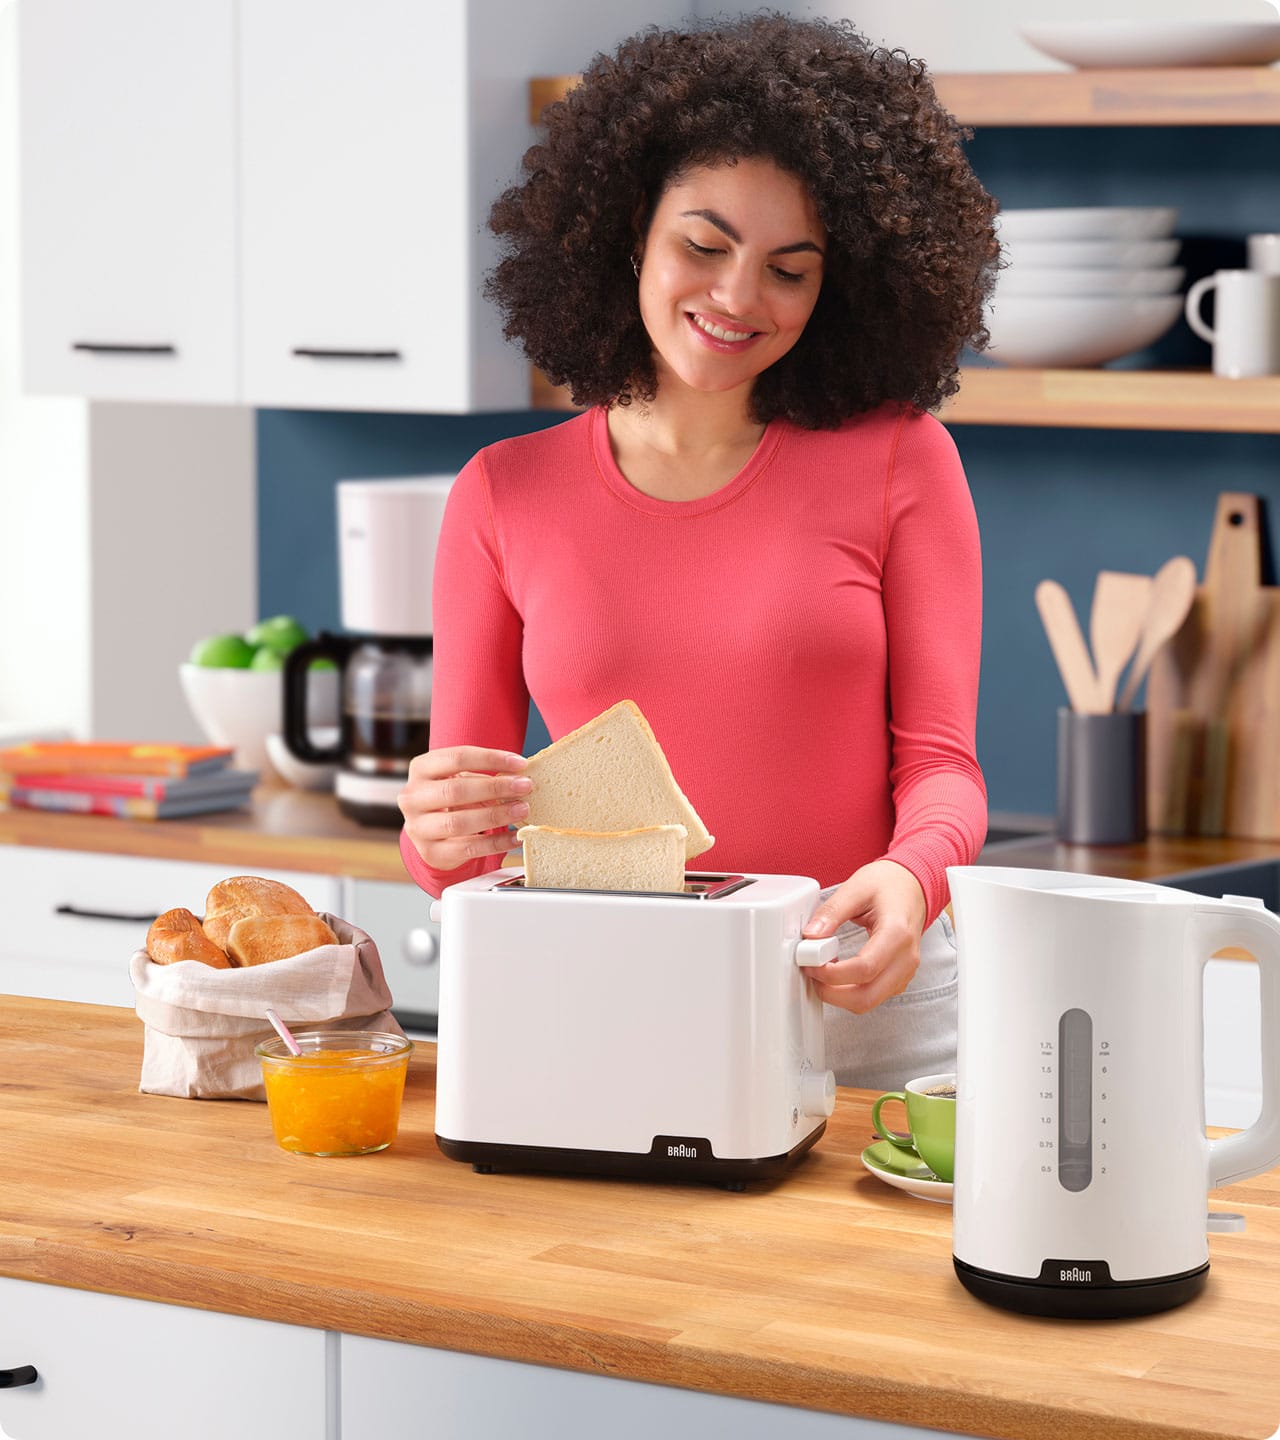 Braun Breakfast Series 1 Toaster HT 1010 WH in use